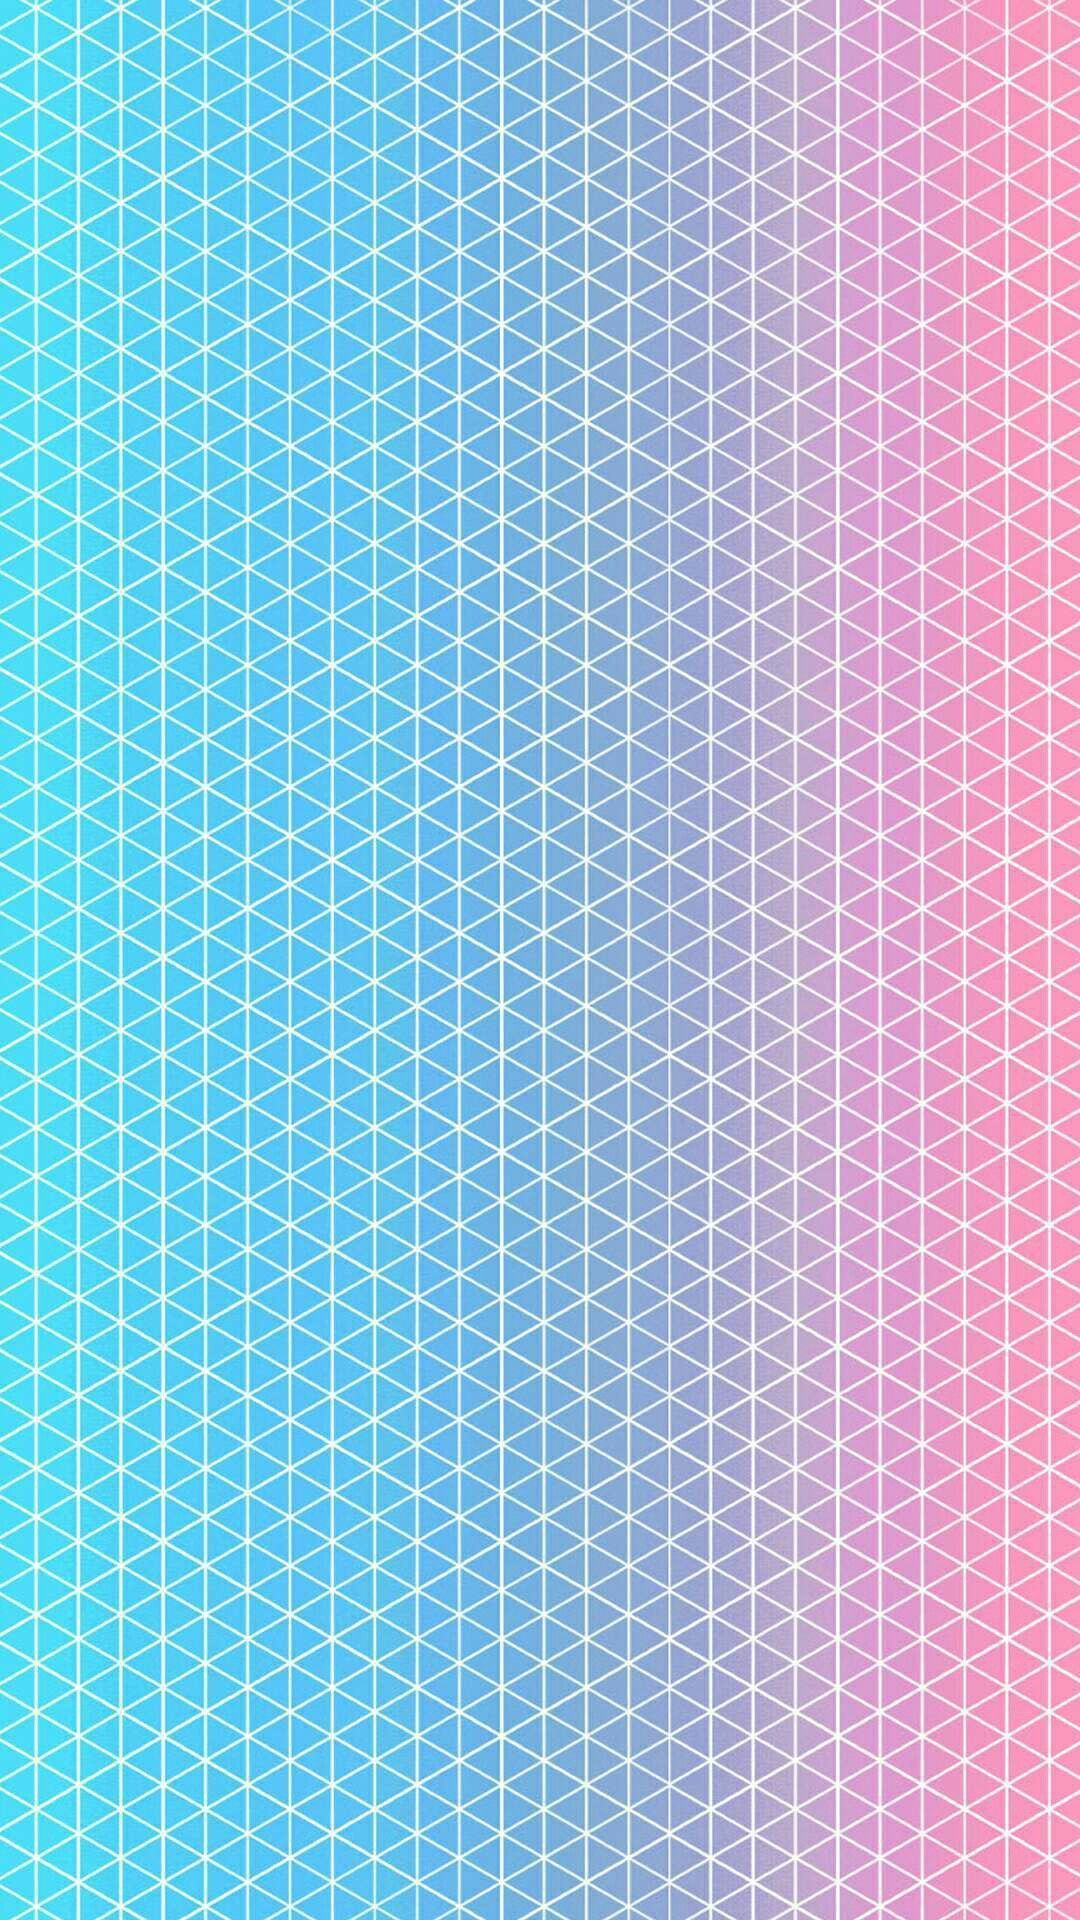 A blue, pink and white gradient iPhone wallpaper - Turquoise